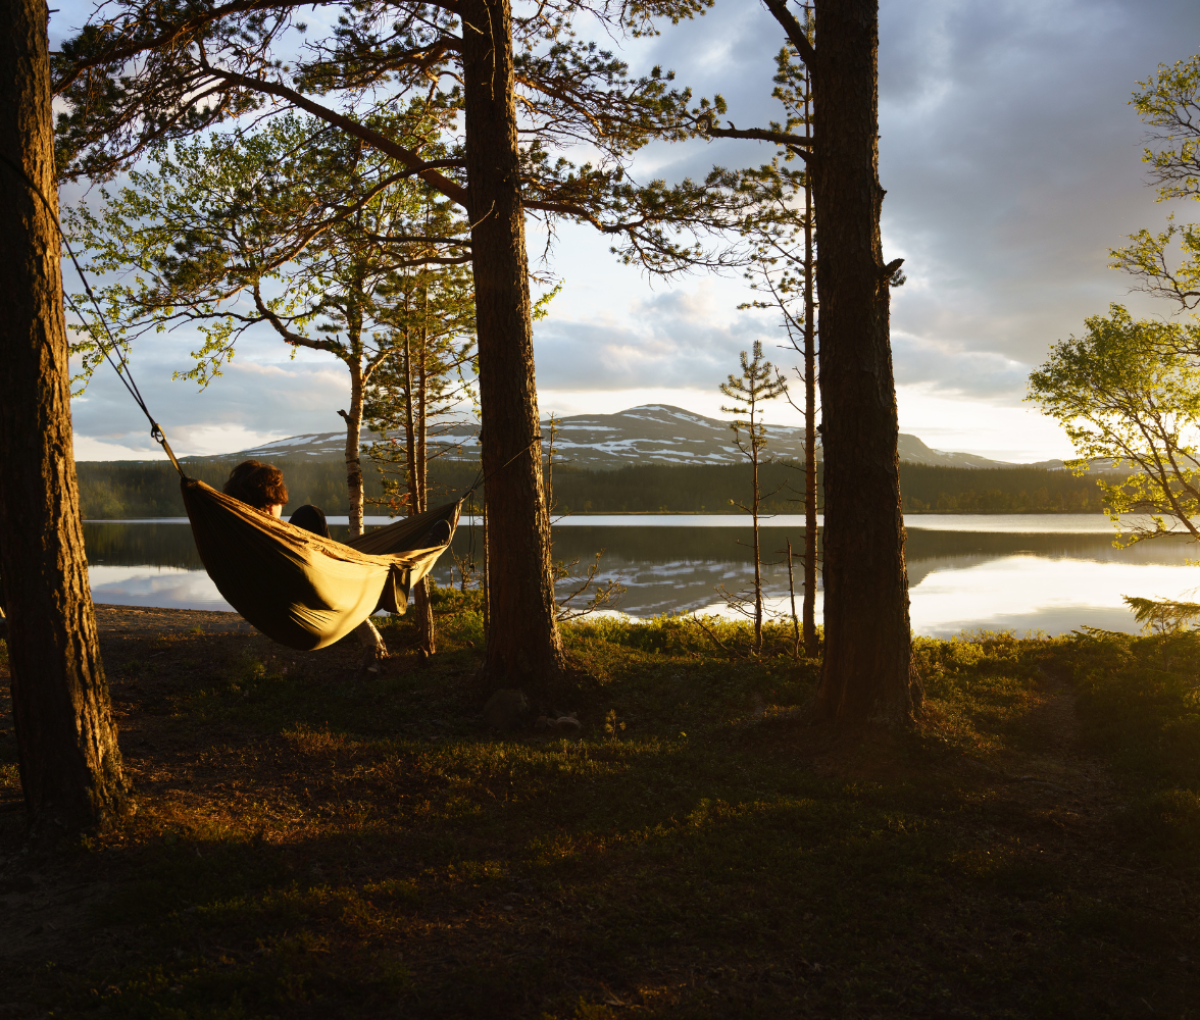 a person lying on a hammock amongst some trees by the side of a mountain lake in Jämtland Härjedalen, Sweden